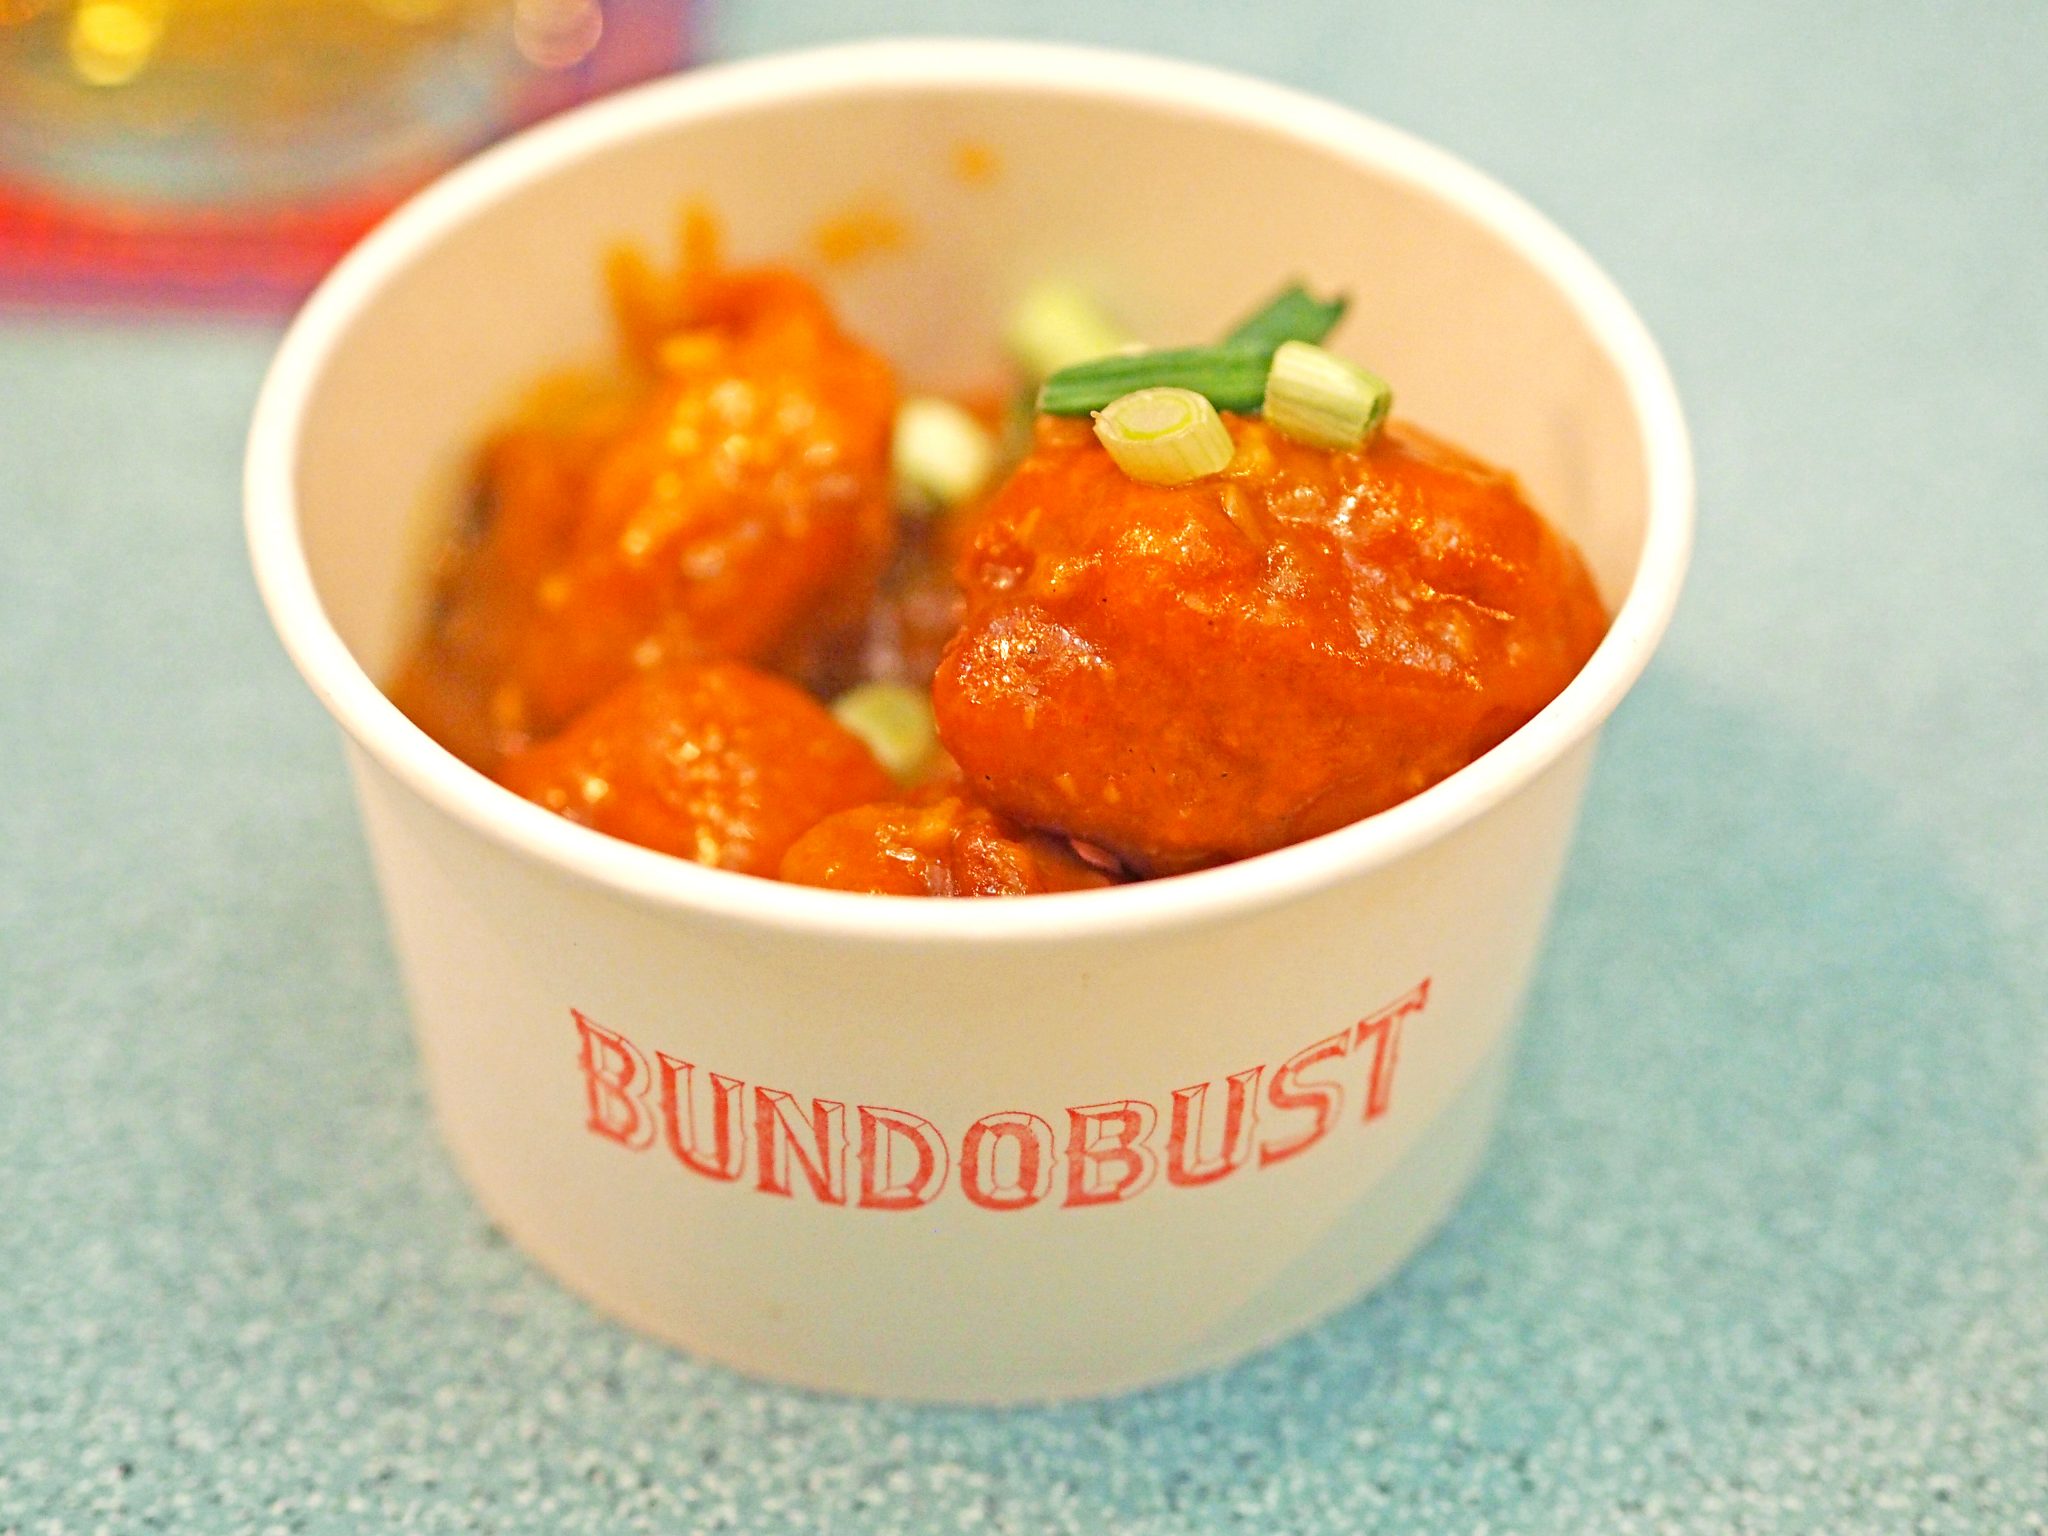 Laura Kate Lucas - Manchester Food, Travel and Lifestyle Blogger | Bundobust Restaurant New Menu Review